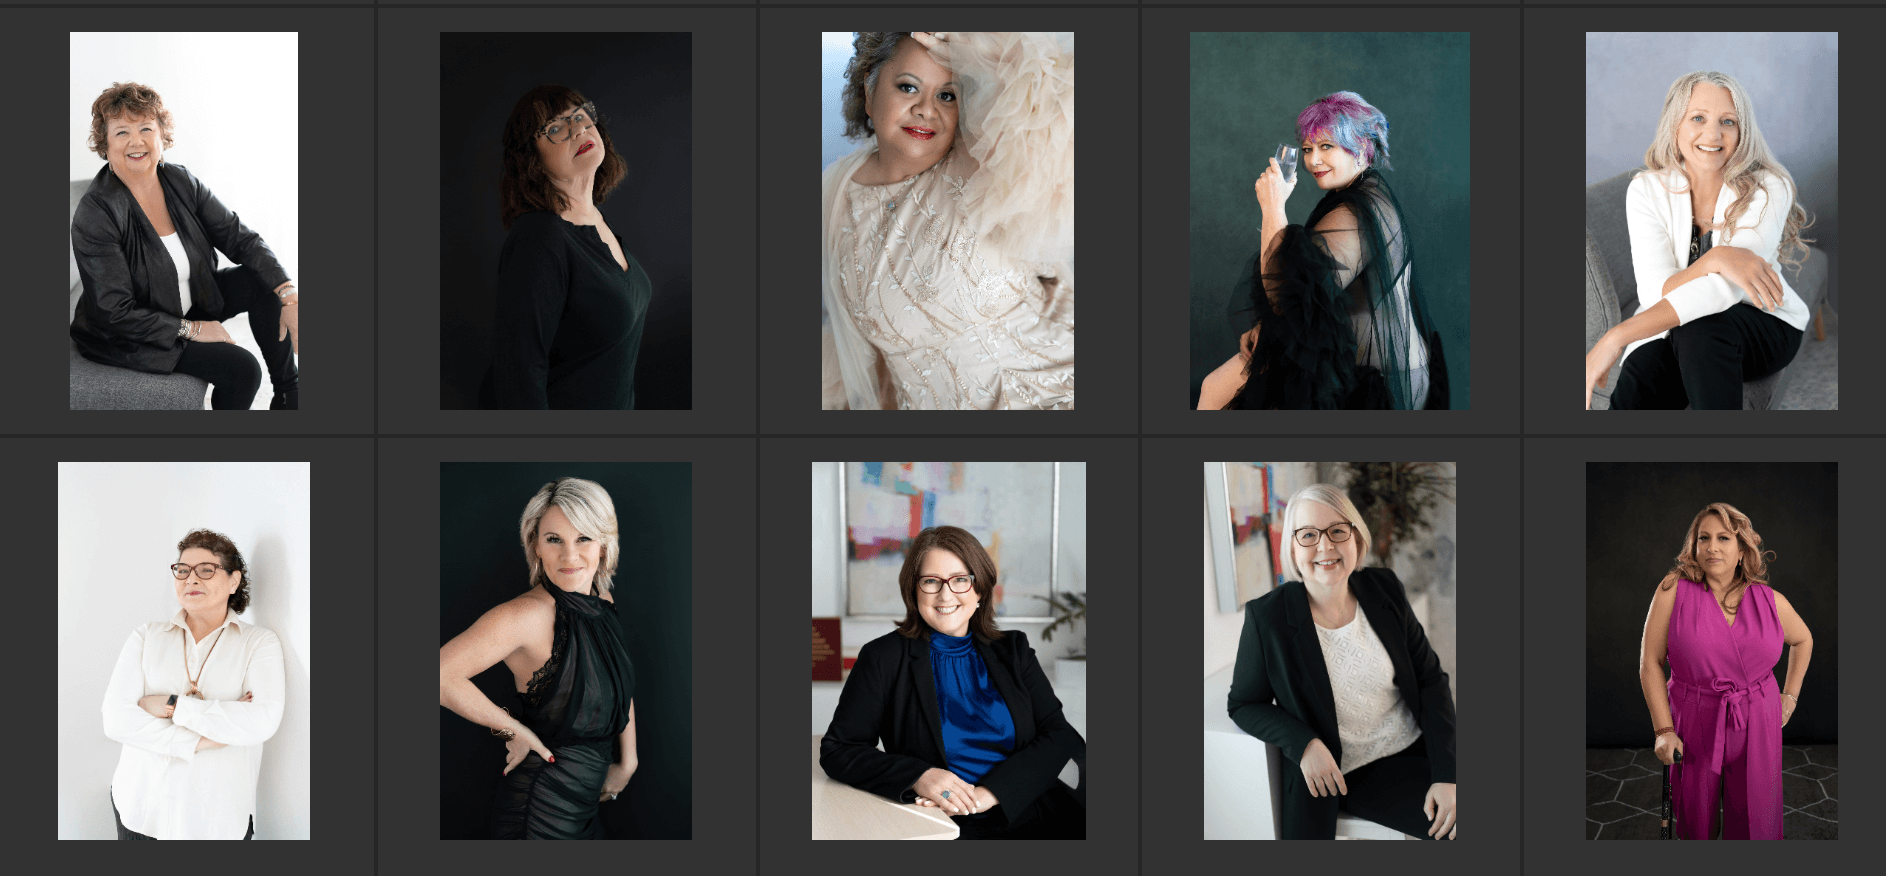 collection of images showing final portrait of some participants in the 50 over 50 campaign